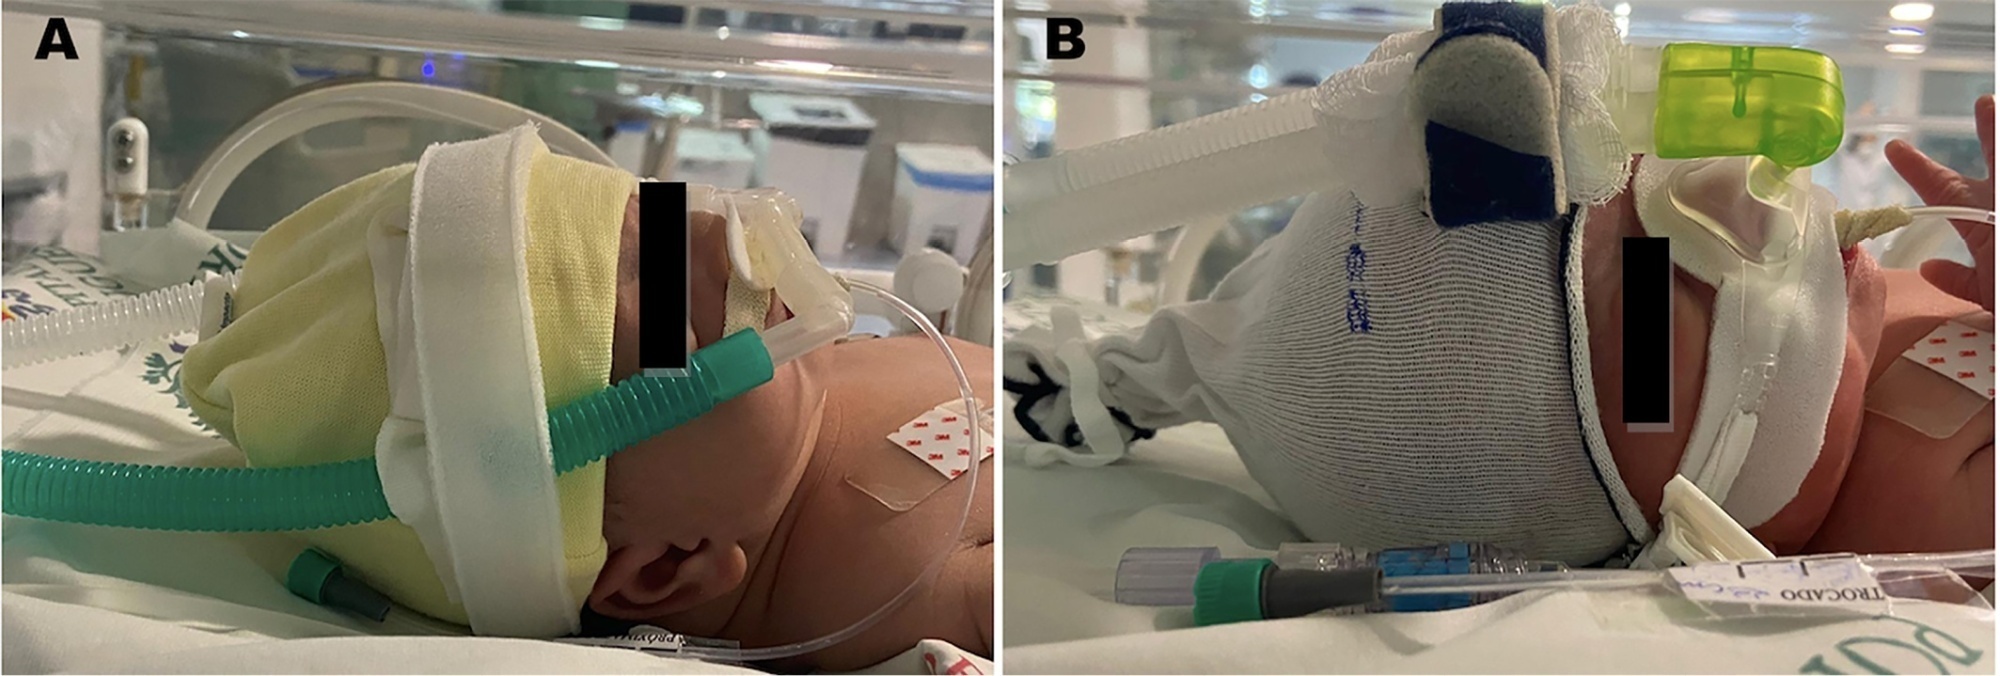 Rotating nasal masks with nasal prongs reduces the incidence of moderate to severe nasal injury in preterm infants supported by noninvasive ventilation